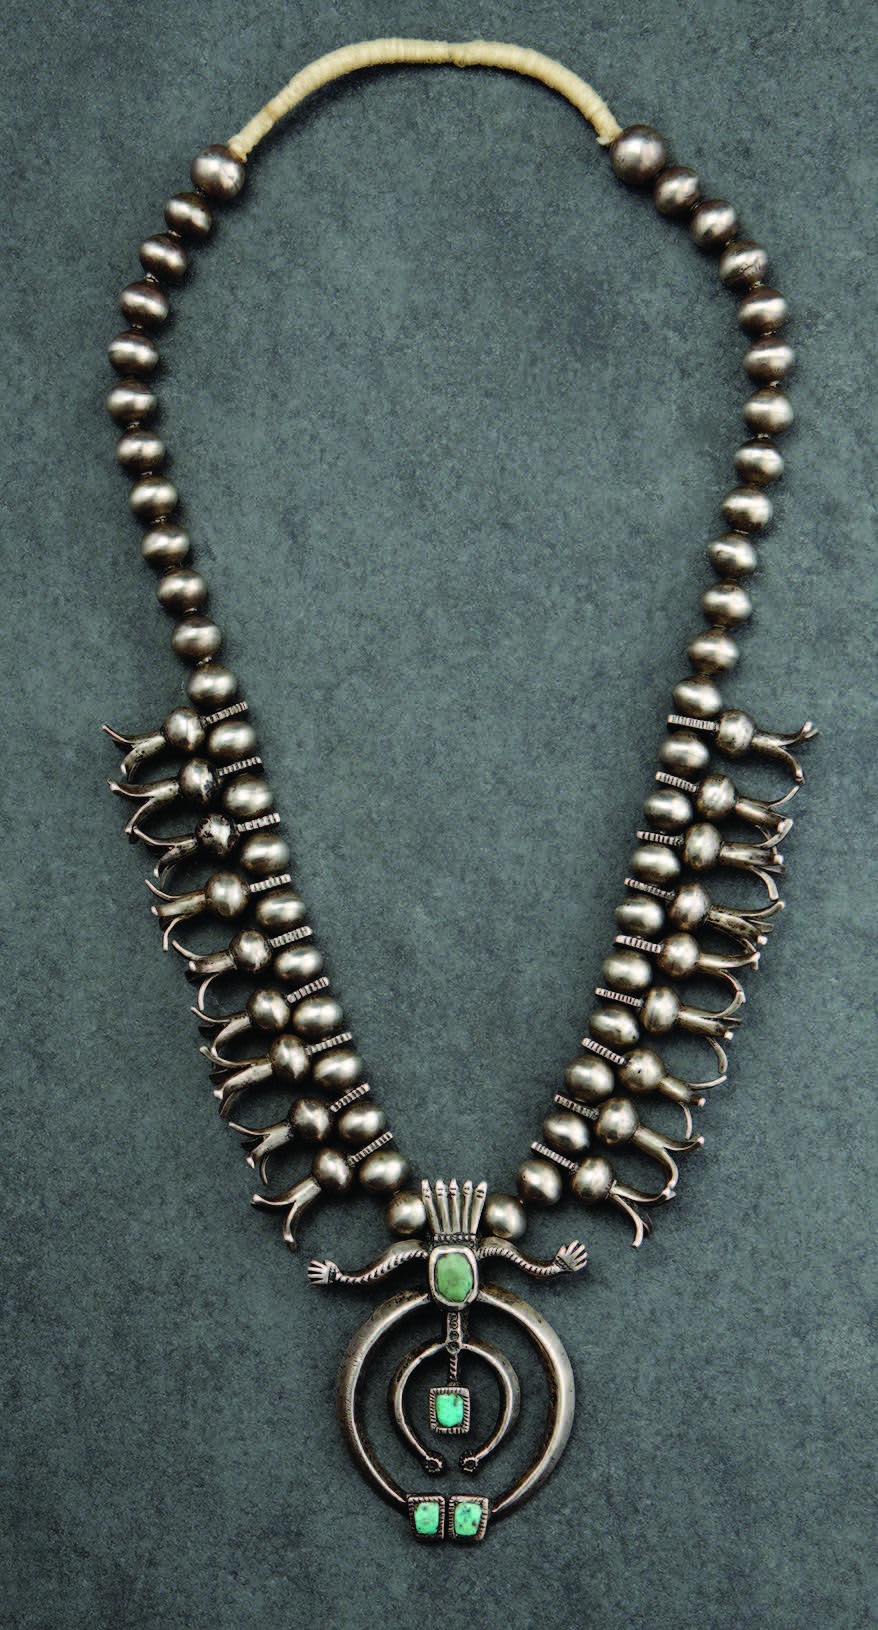 Squash-blossom necklace by Slender Maker of Silver (Navajo), ca. 1885. Silver, turquoise.